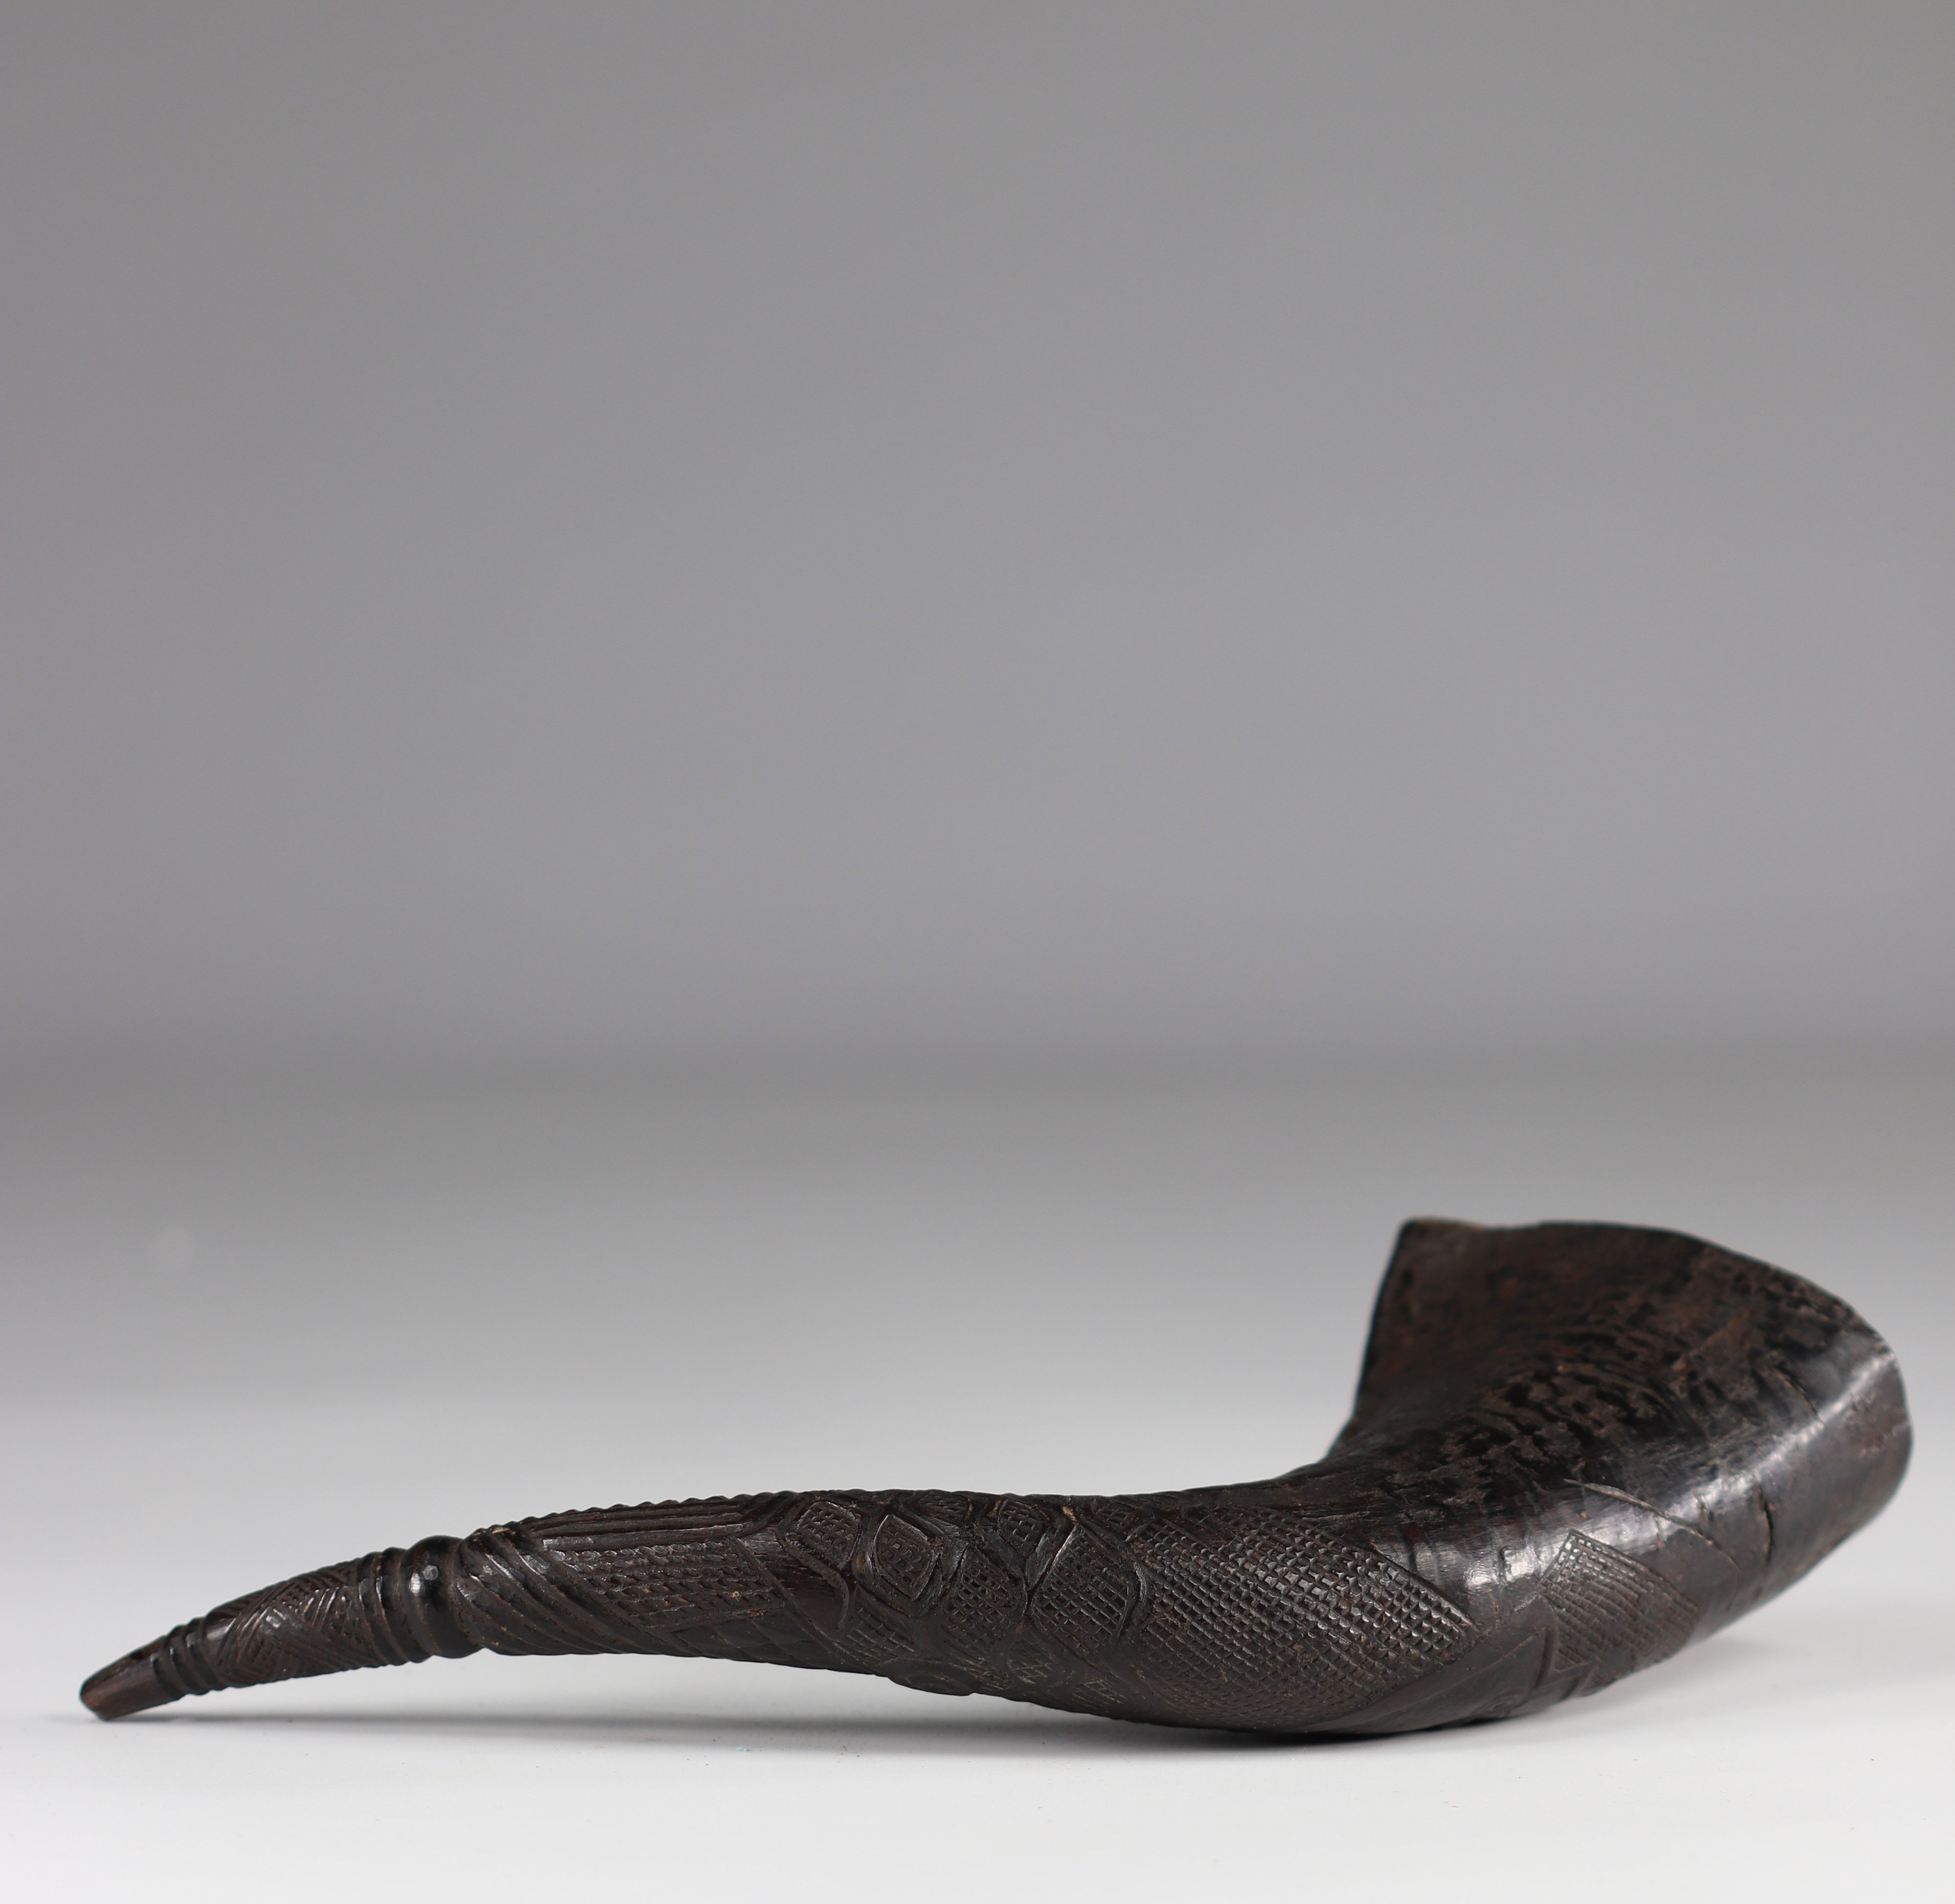 Beautiful buffalo horn decorated with a face used to consume palm wine - Kuba - early 20th century - - Image 2 of 3